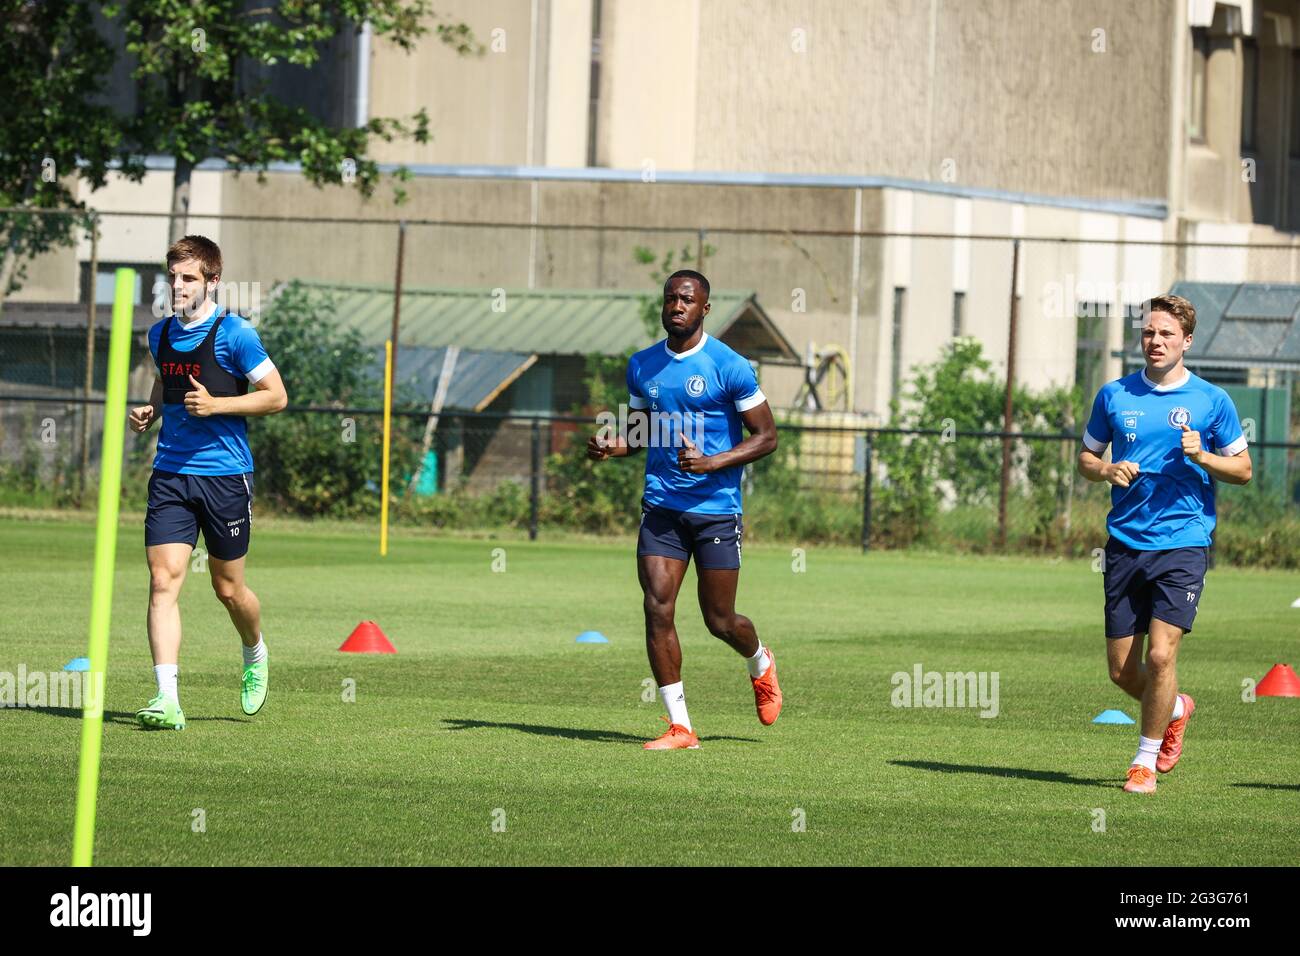 Gent's Giorgi Chakvetadze, Gent's Elisha Owusu and Gent's Matisse Samoise pictured in action during the first training session of the 2021-2022 season Stock Photo